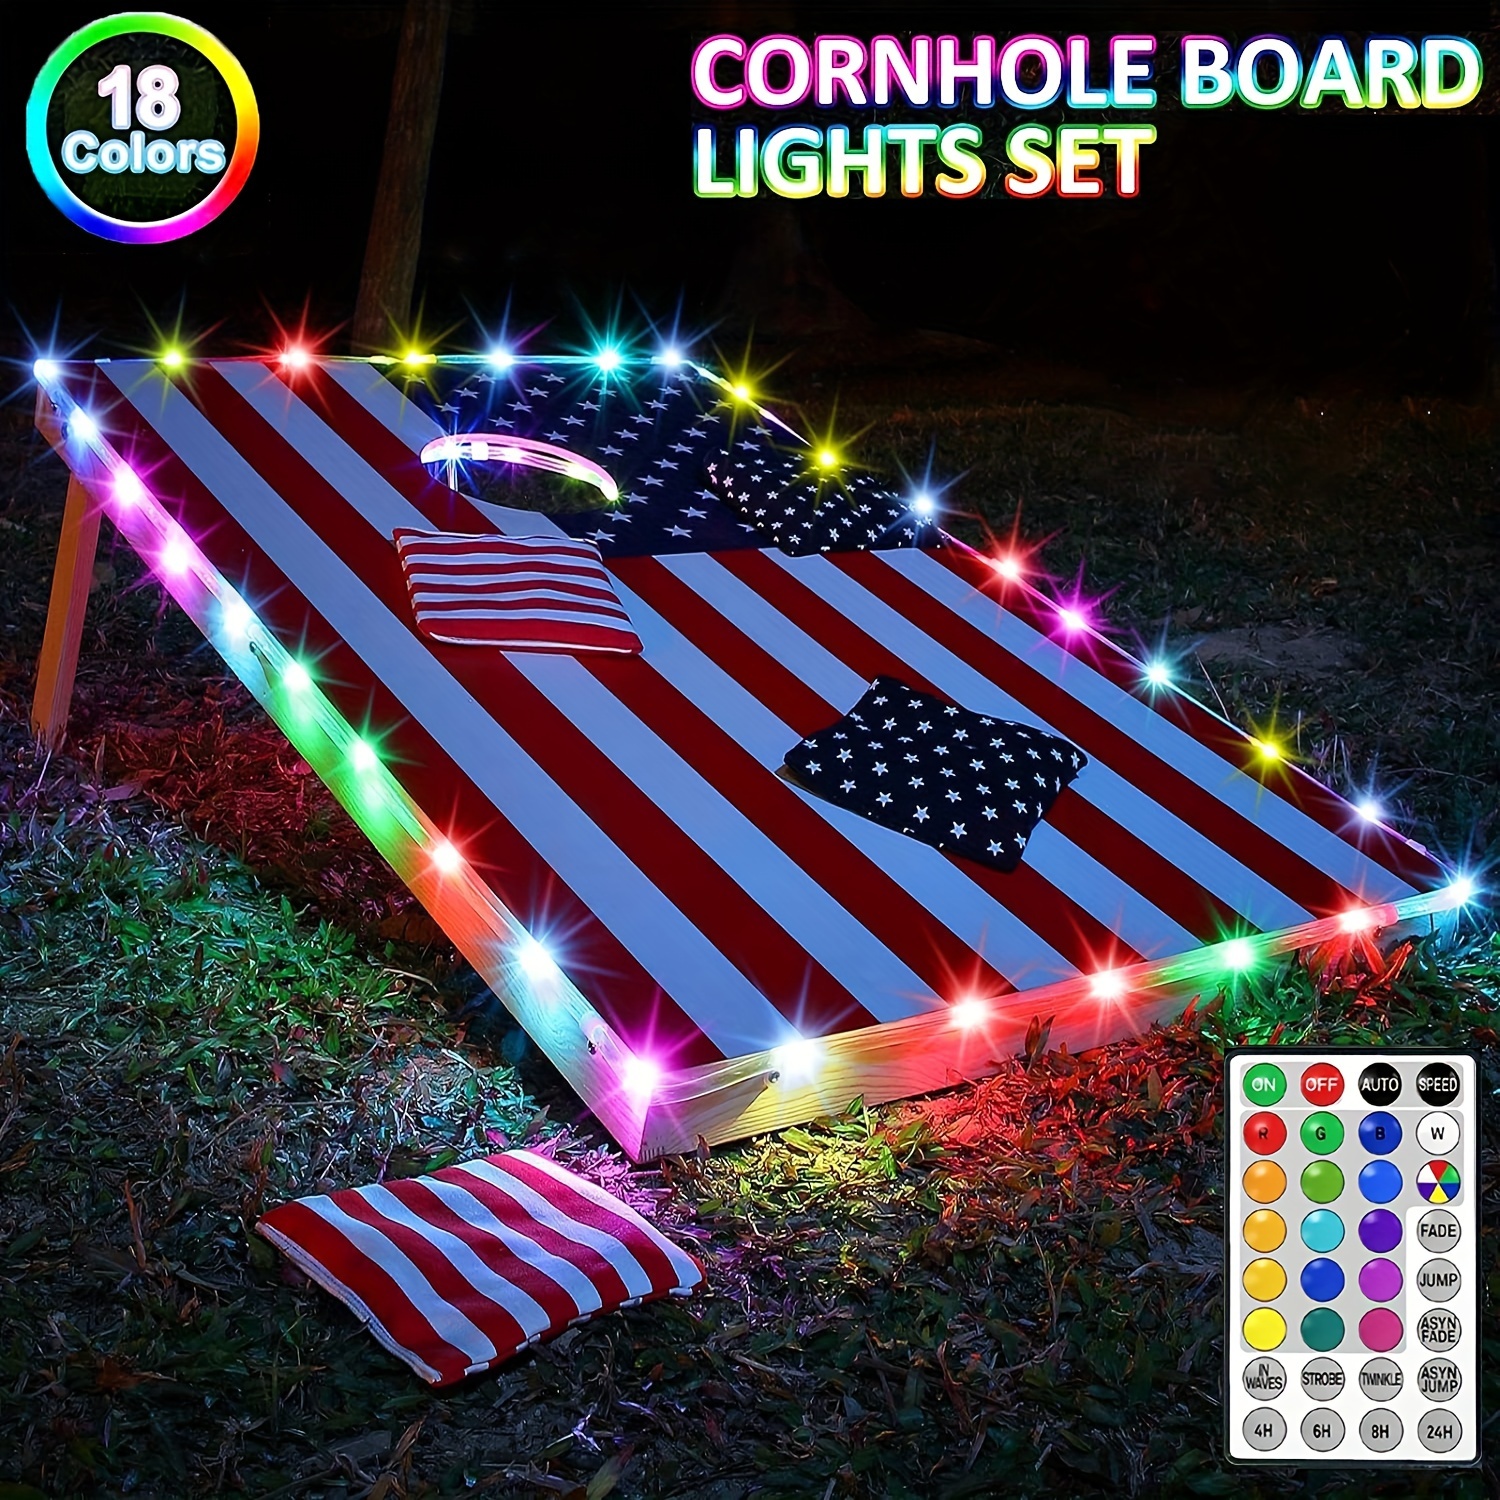 1pcs LED Cornhole Lights, Remote Control Cornhole Board Edge and Ring LED  Lights, 16Color change by yourself, a great addition for playing Bean Bag  Toss Cornhole game at the family backyard at